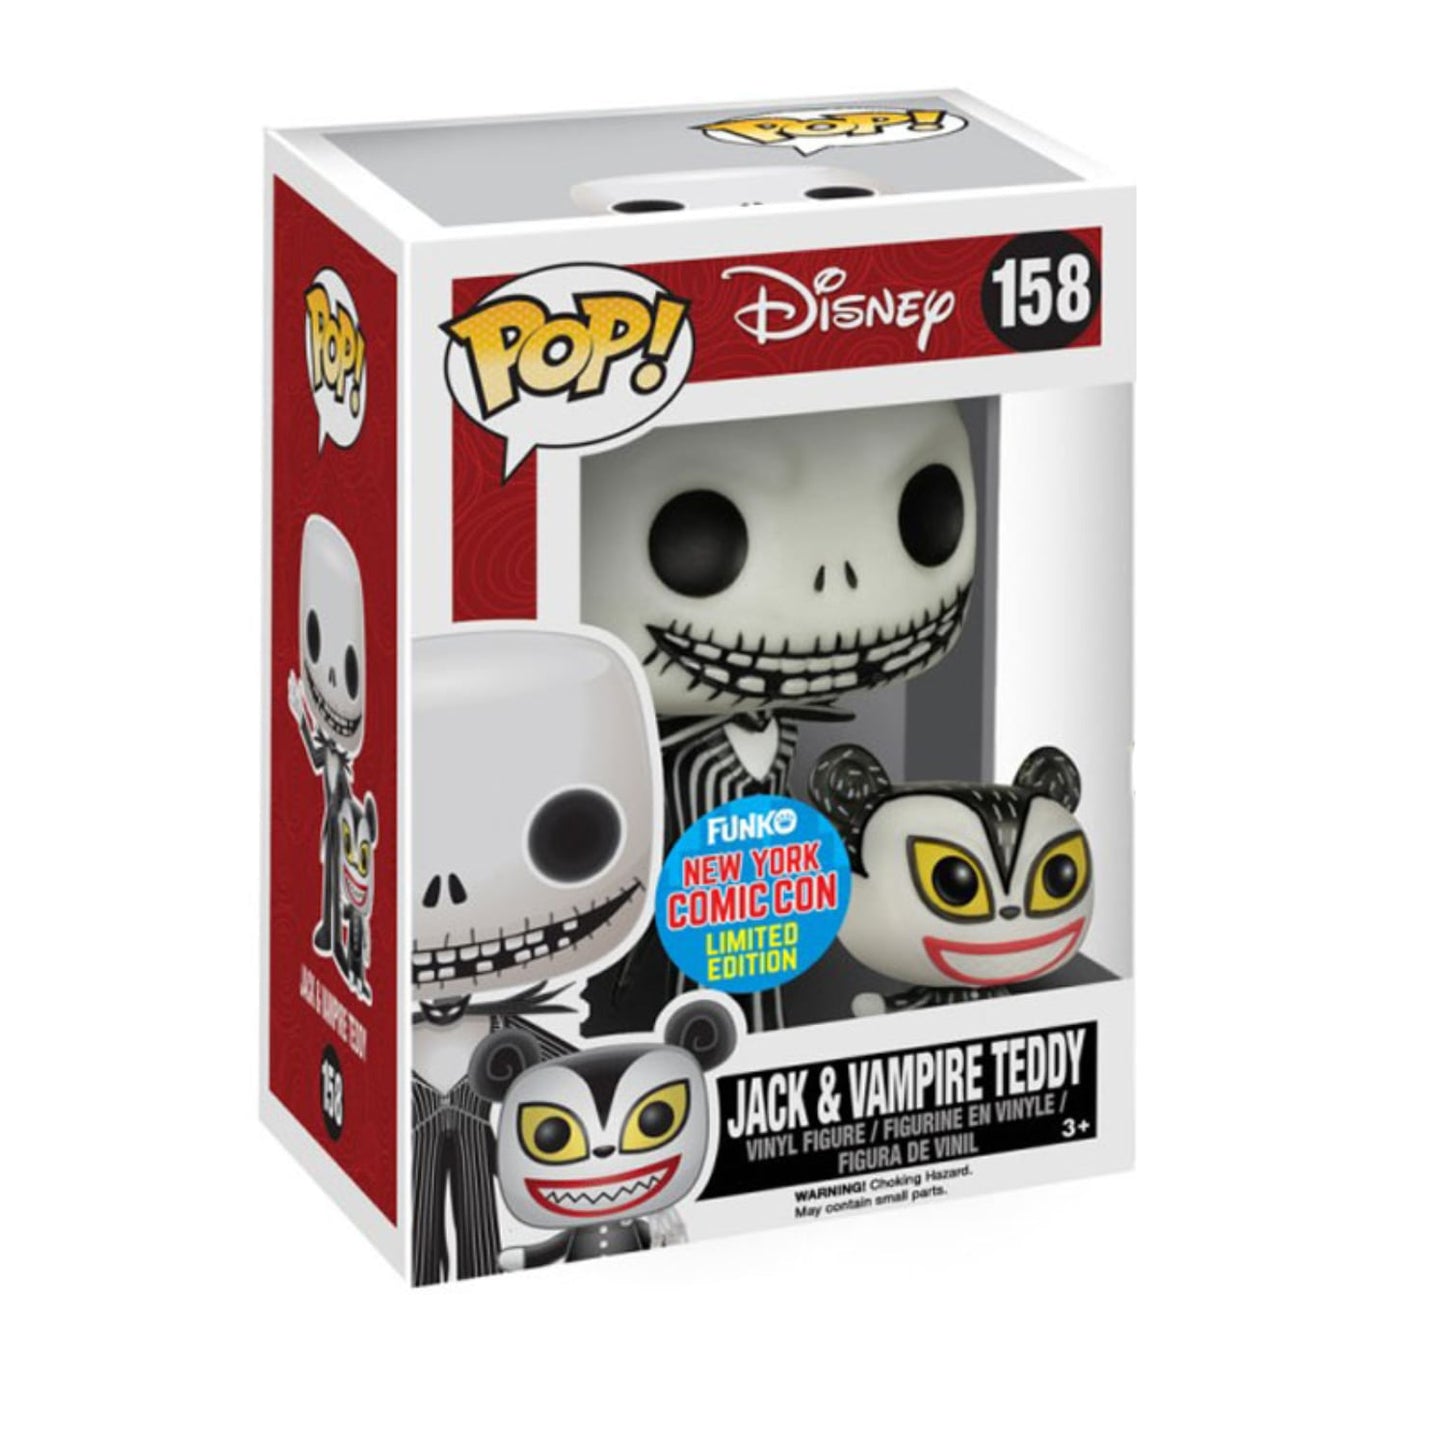 Funko Pop Disney Nightmare Before Christmas Jack And Vampire Teddy NYCC Limited Edition